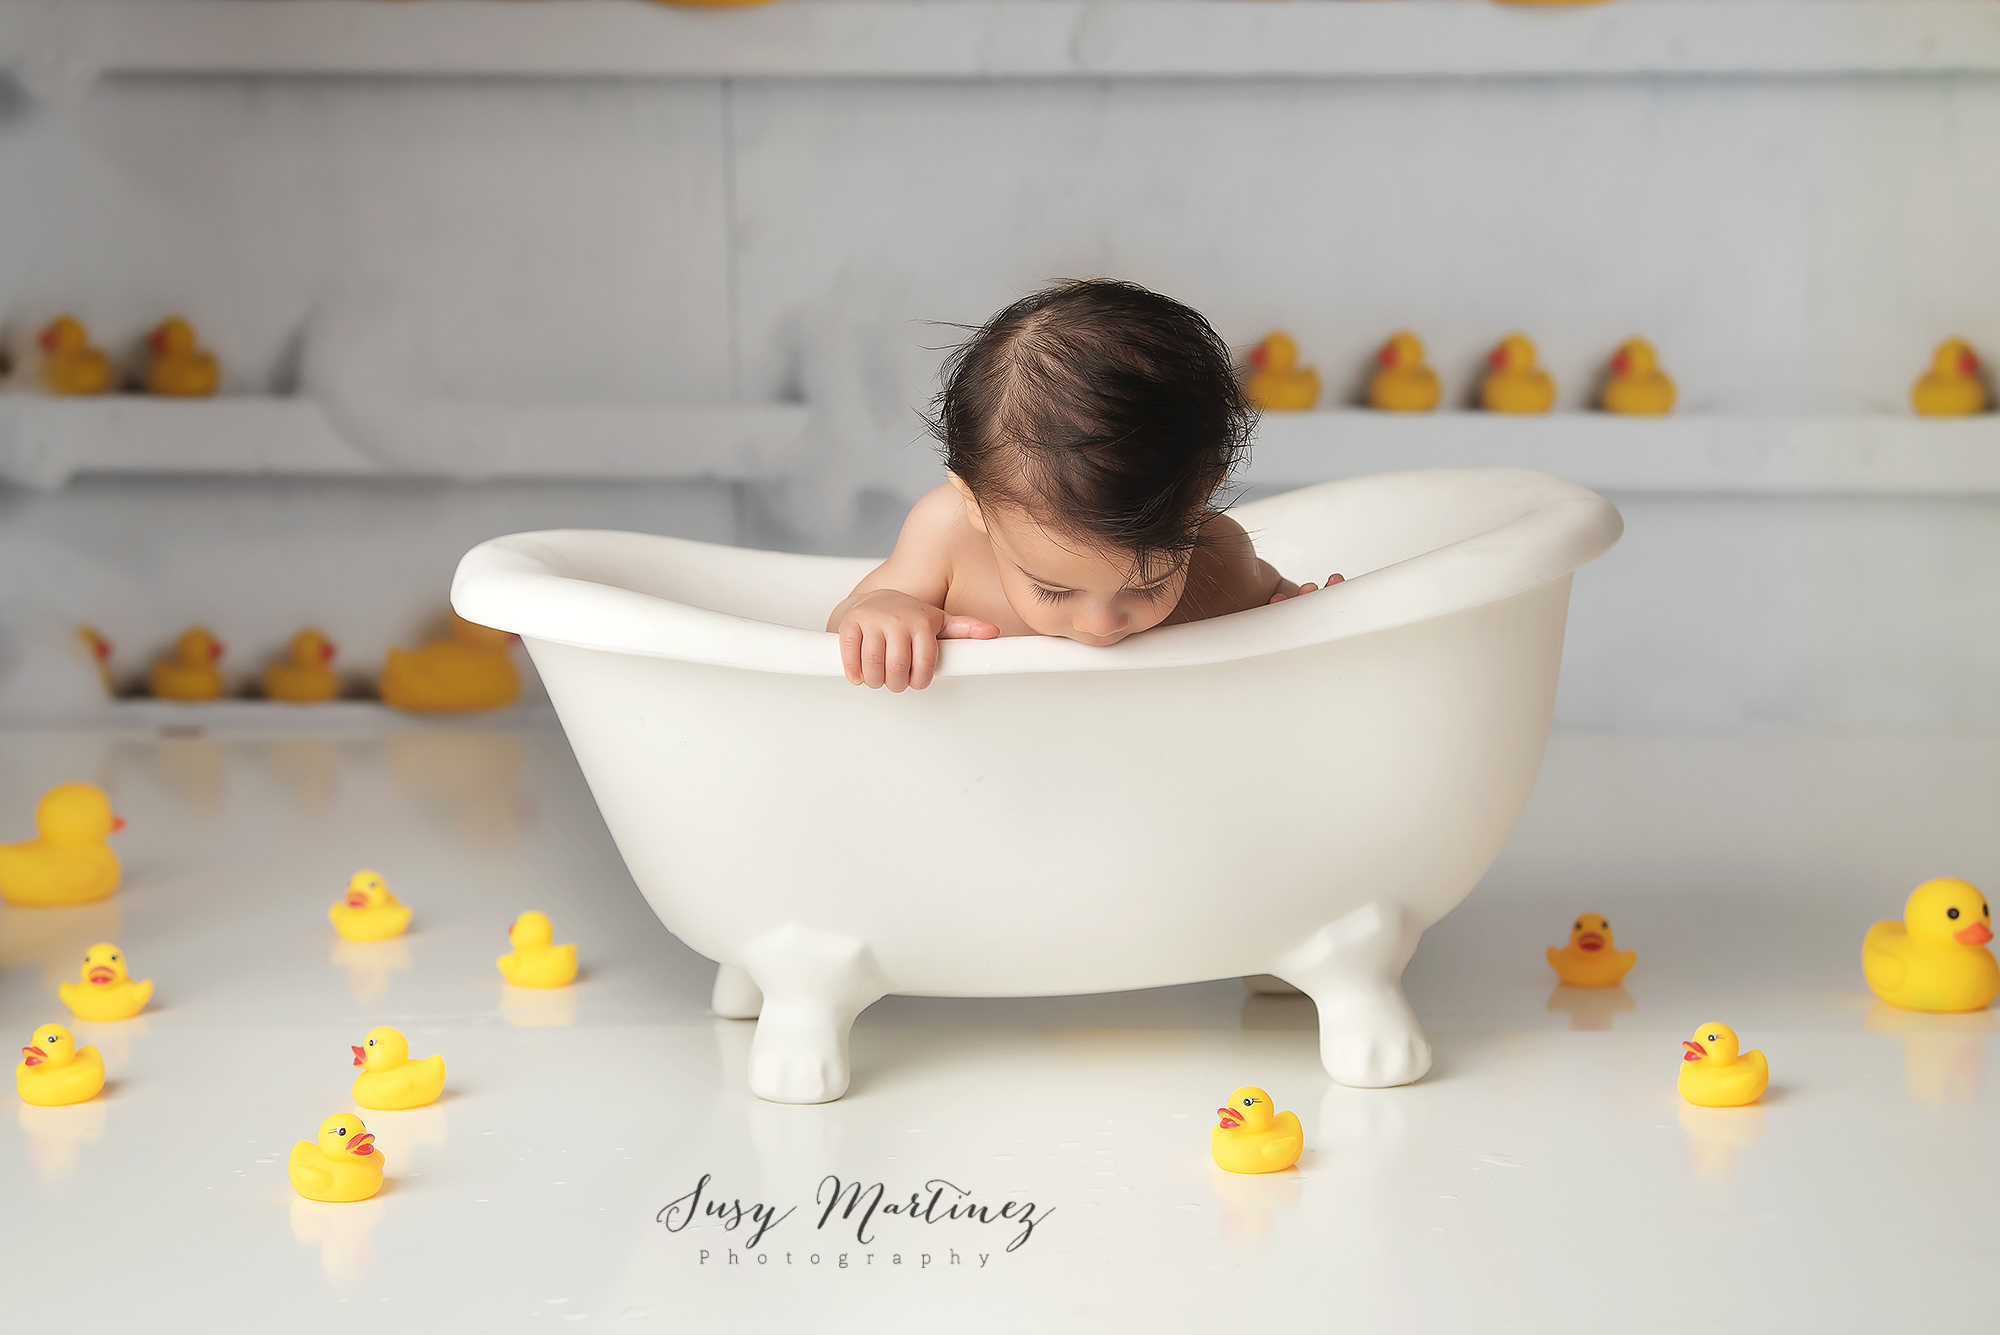 Susy Martinez Photography photographs tub time with ducks